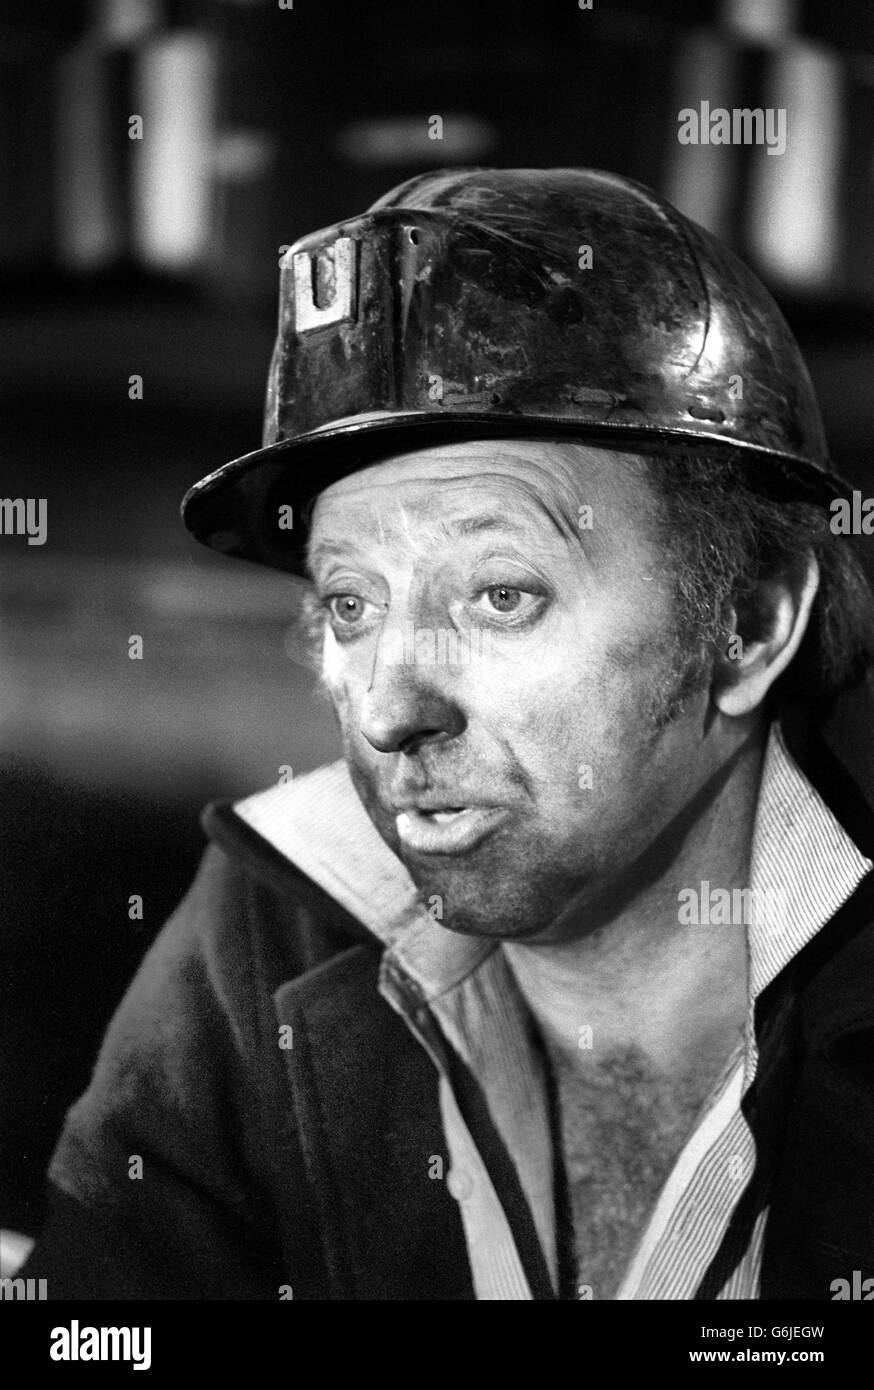 Mr Arthur Scargill, left-wing president of the Yorkshire miners. In his early forties, he went underground at the age of 17 since when he has striven to improve the miner's lot. He will be a strong candidate from the presidency of the National Union of Mineworkers when Joe Gormley retires. Stock Photo